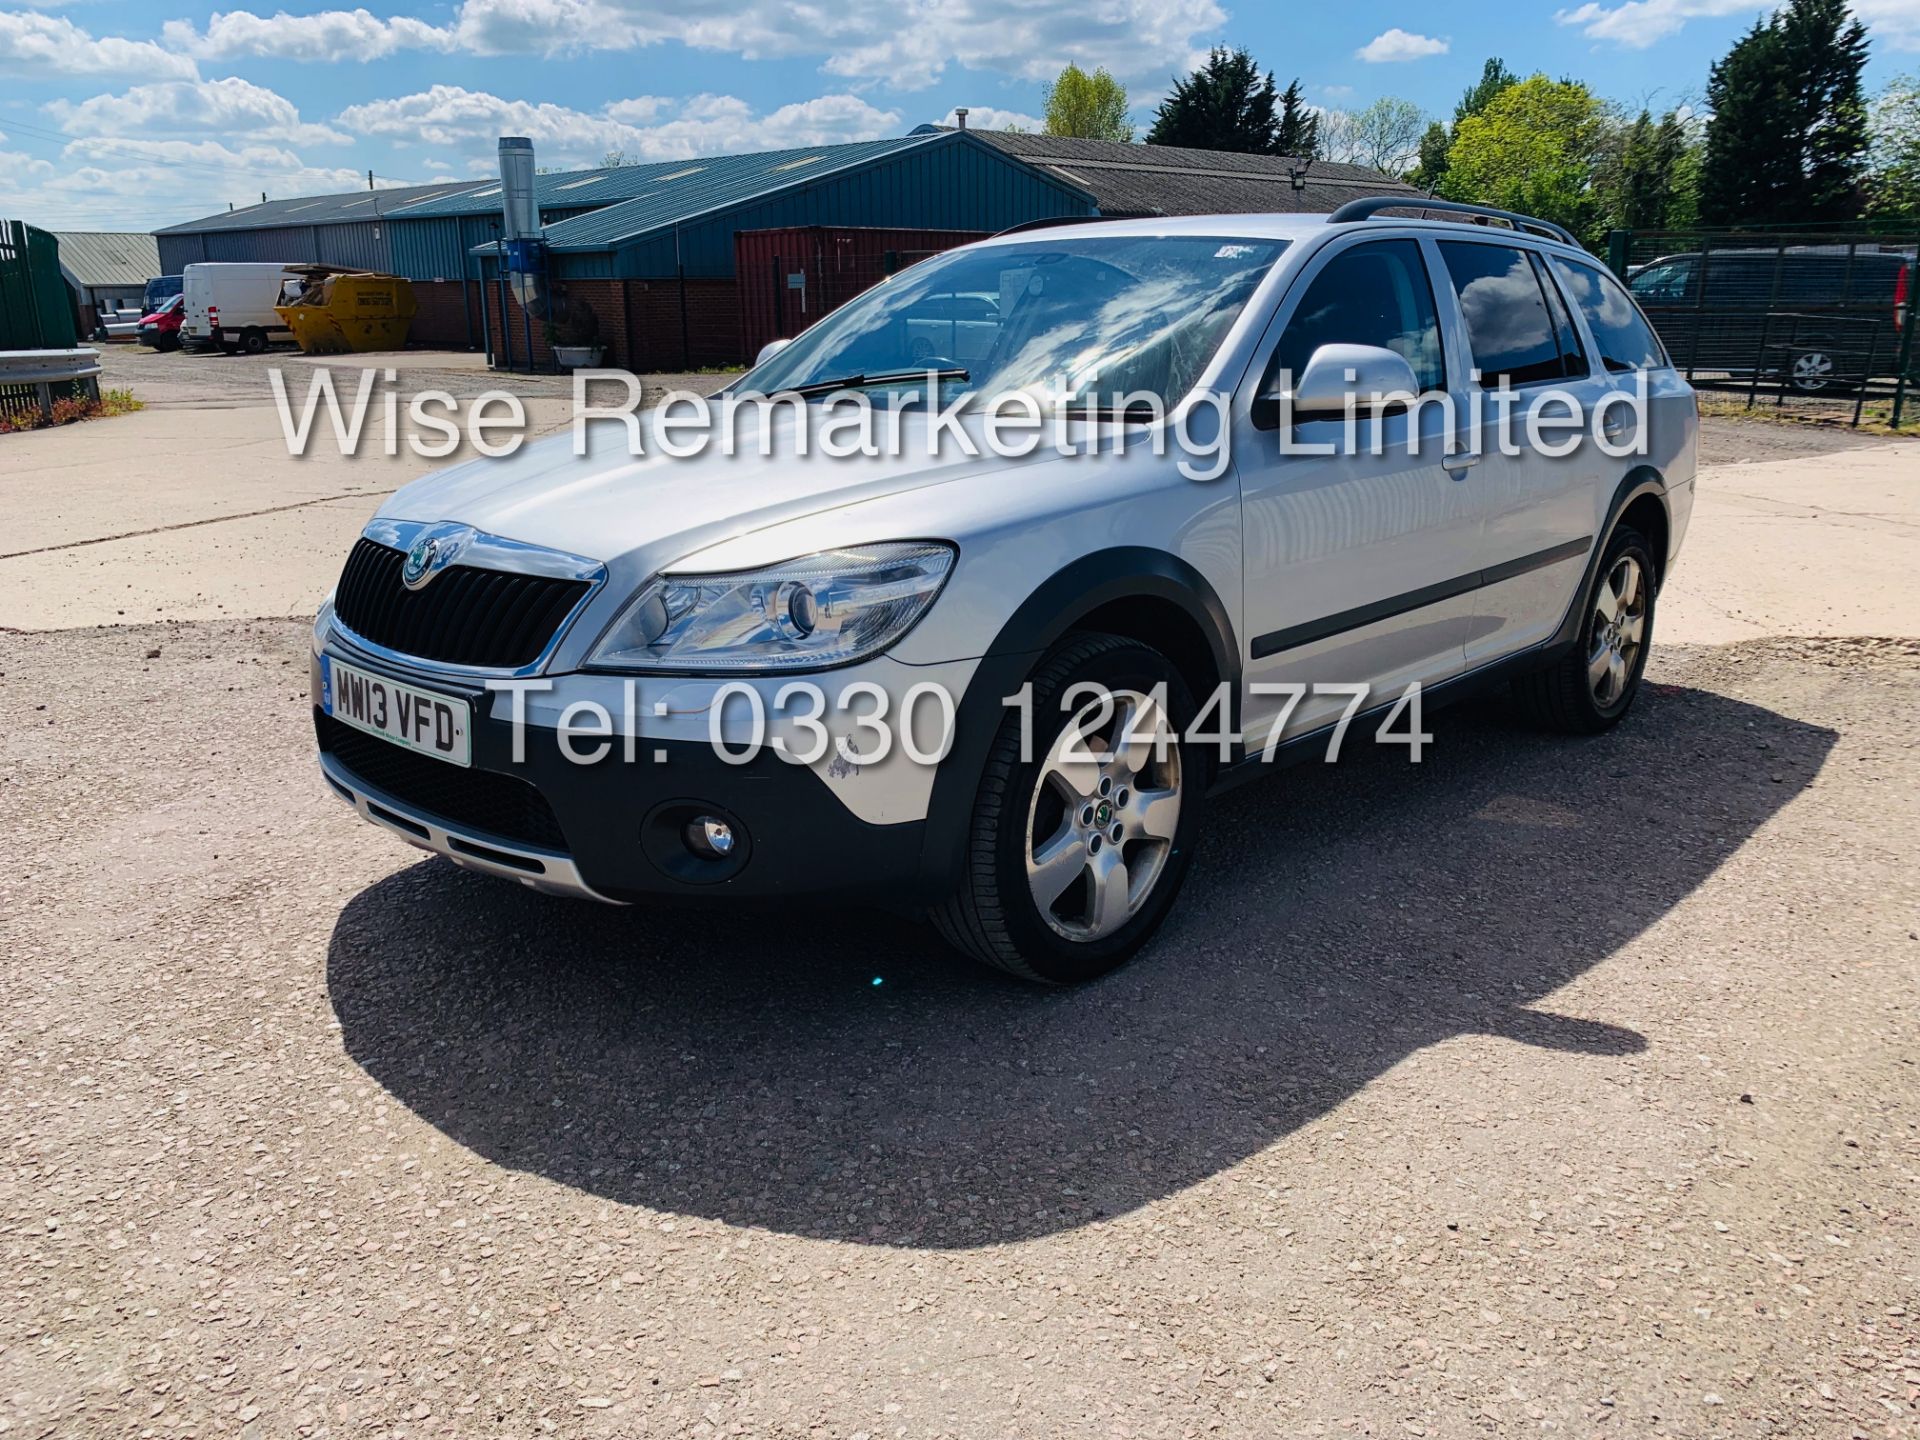 SKODA OCTAVIA (SCOUT) 2.0tdi DSG AUTOMATIC ESTATE / 2013 / 1 OWNER WITH FULL HISTORY / 140BHP / 4x4